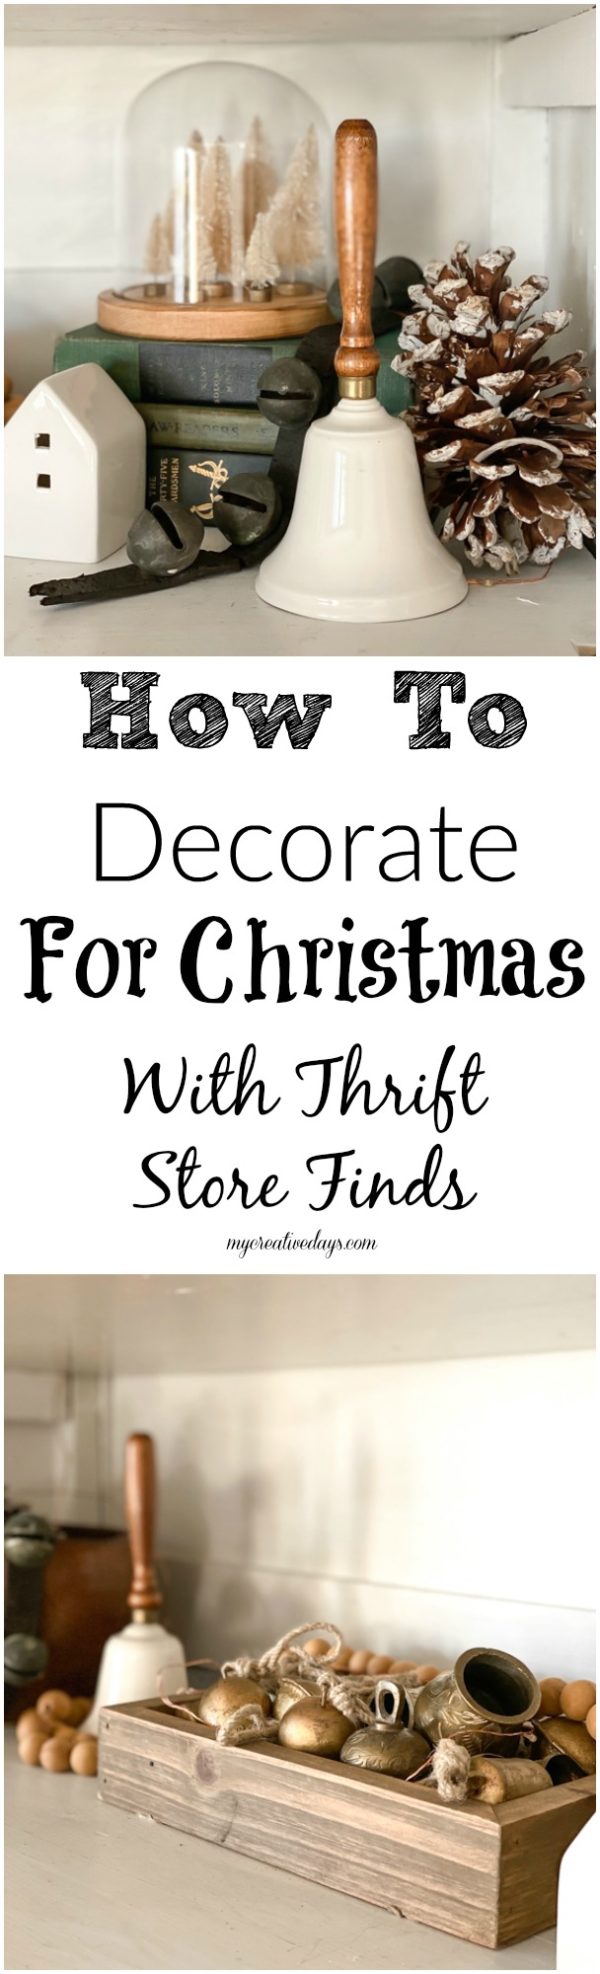 How To Decorate For Christmas With Thrift Store Finds - My Creative Days